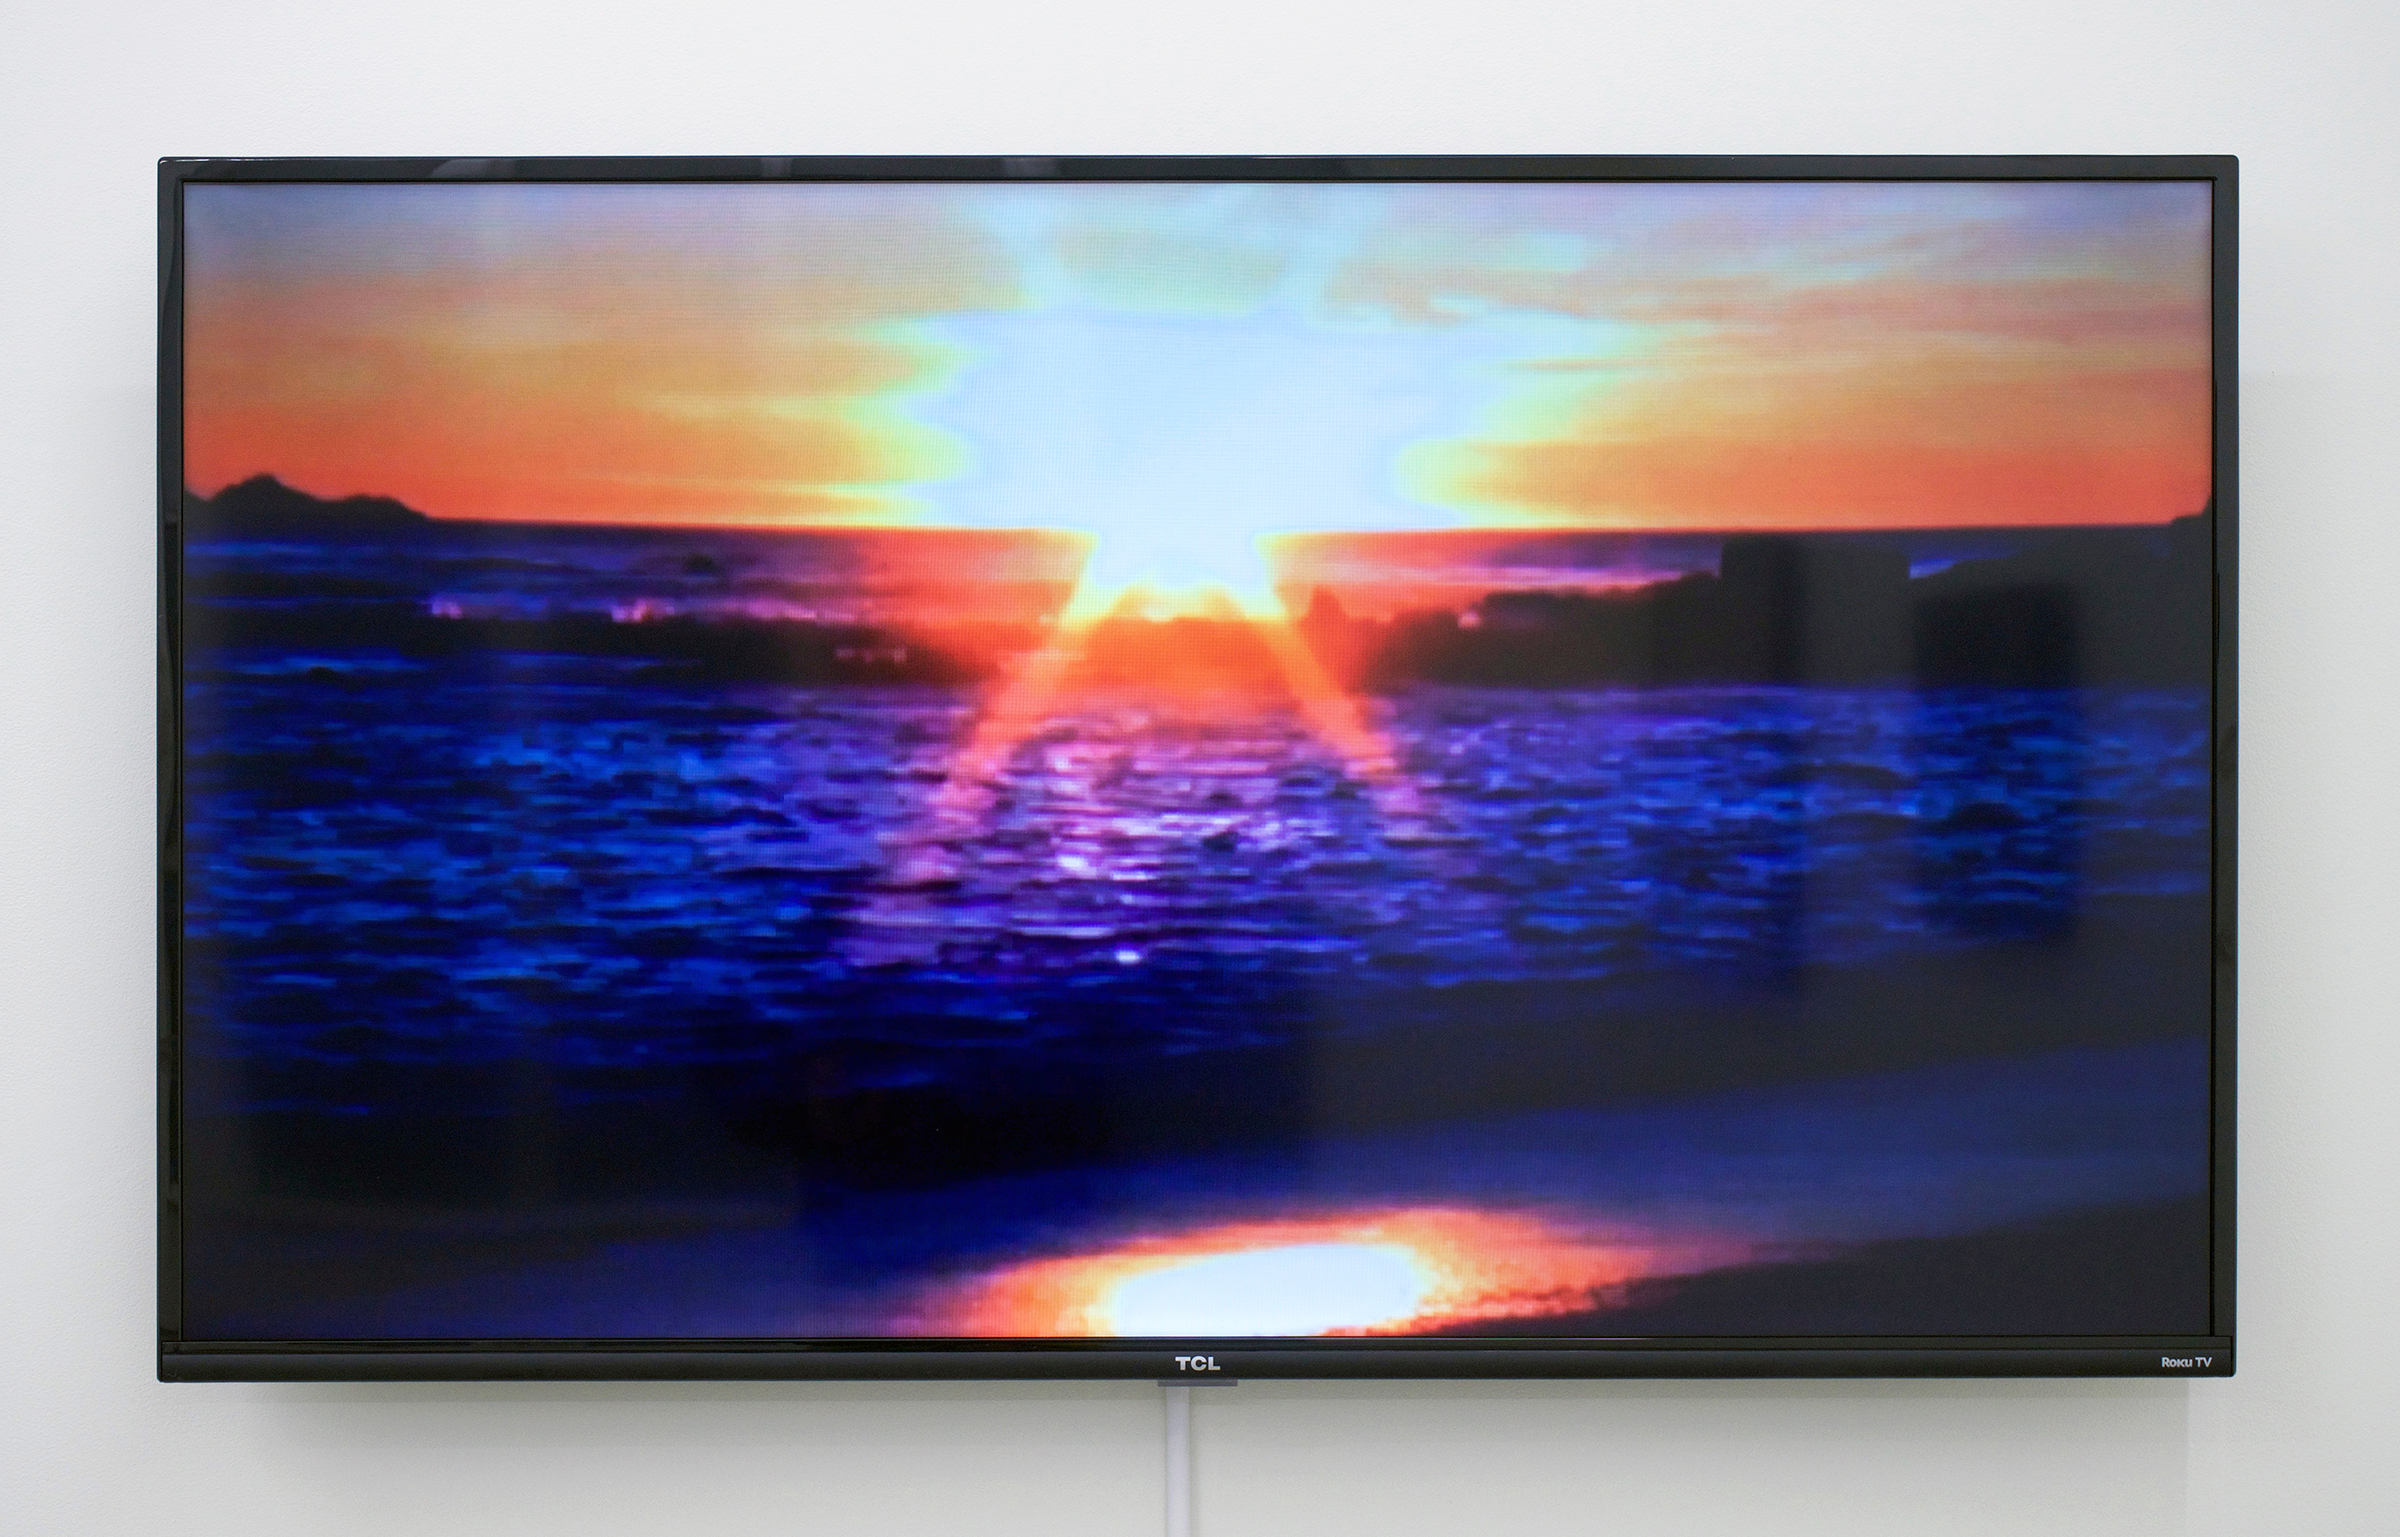  BESSMA KHALAF  Standing On A Beach , 2015 Single channel video with sound, 2min 9sec lood, 50” monitor, Edition of 5 with 1 AP 